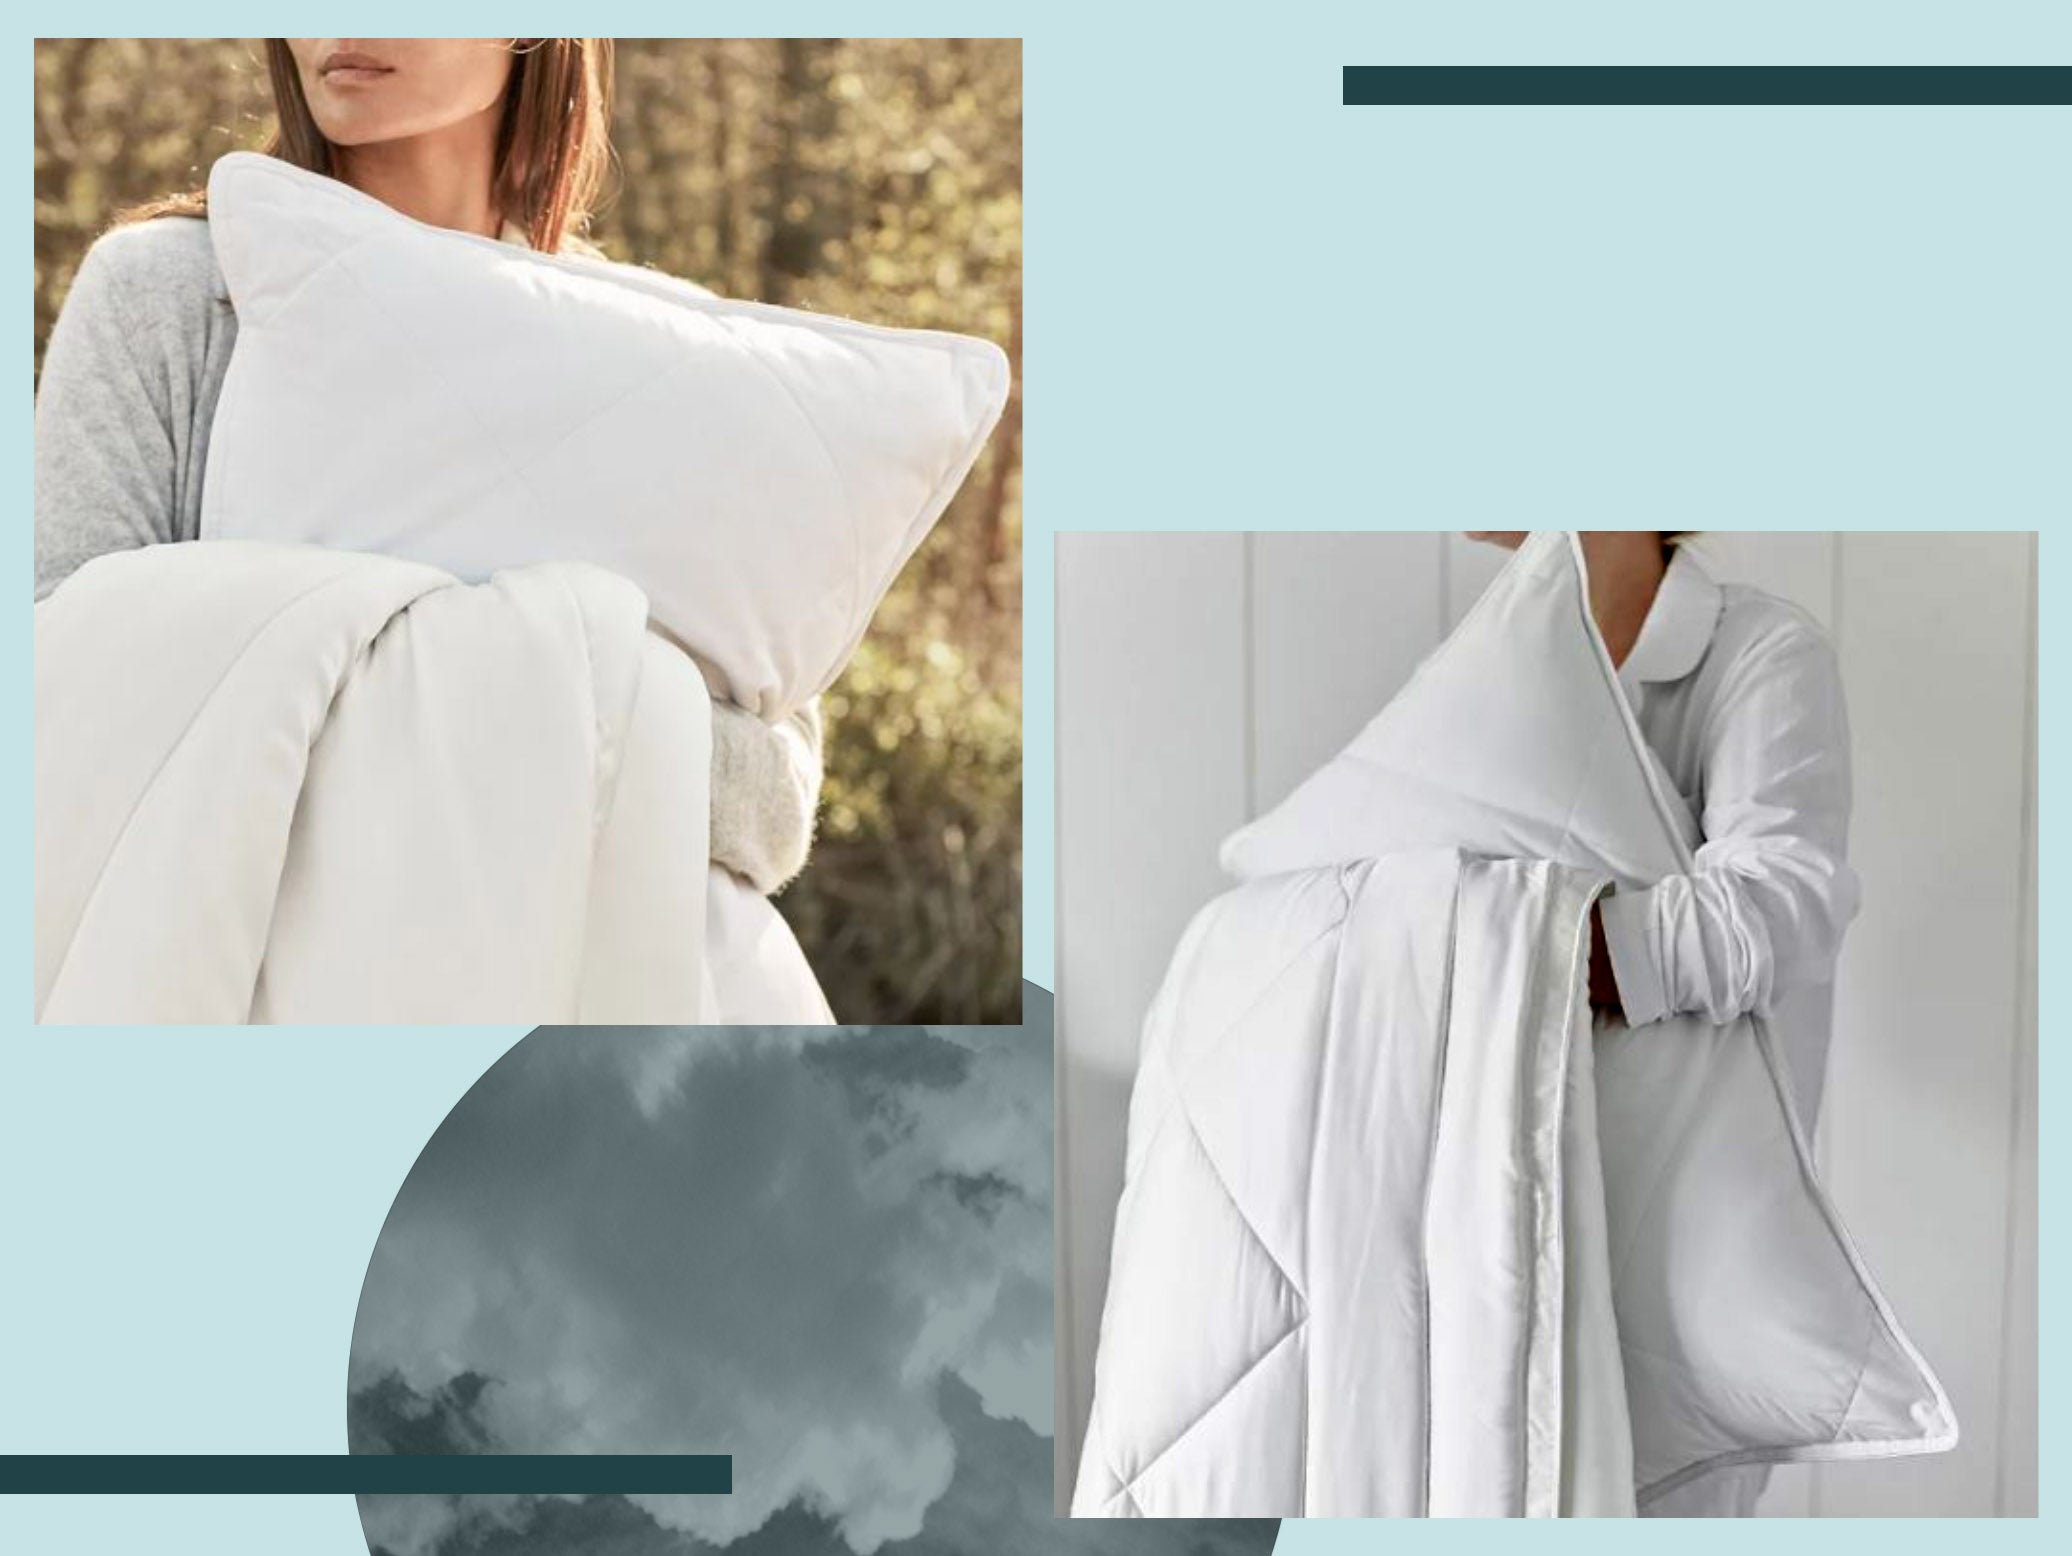 Ideal for front sleepers and those with allergies, we reviewed The White Company’s super-soft silk pillowcase to see if it was worth the price tag